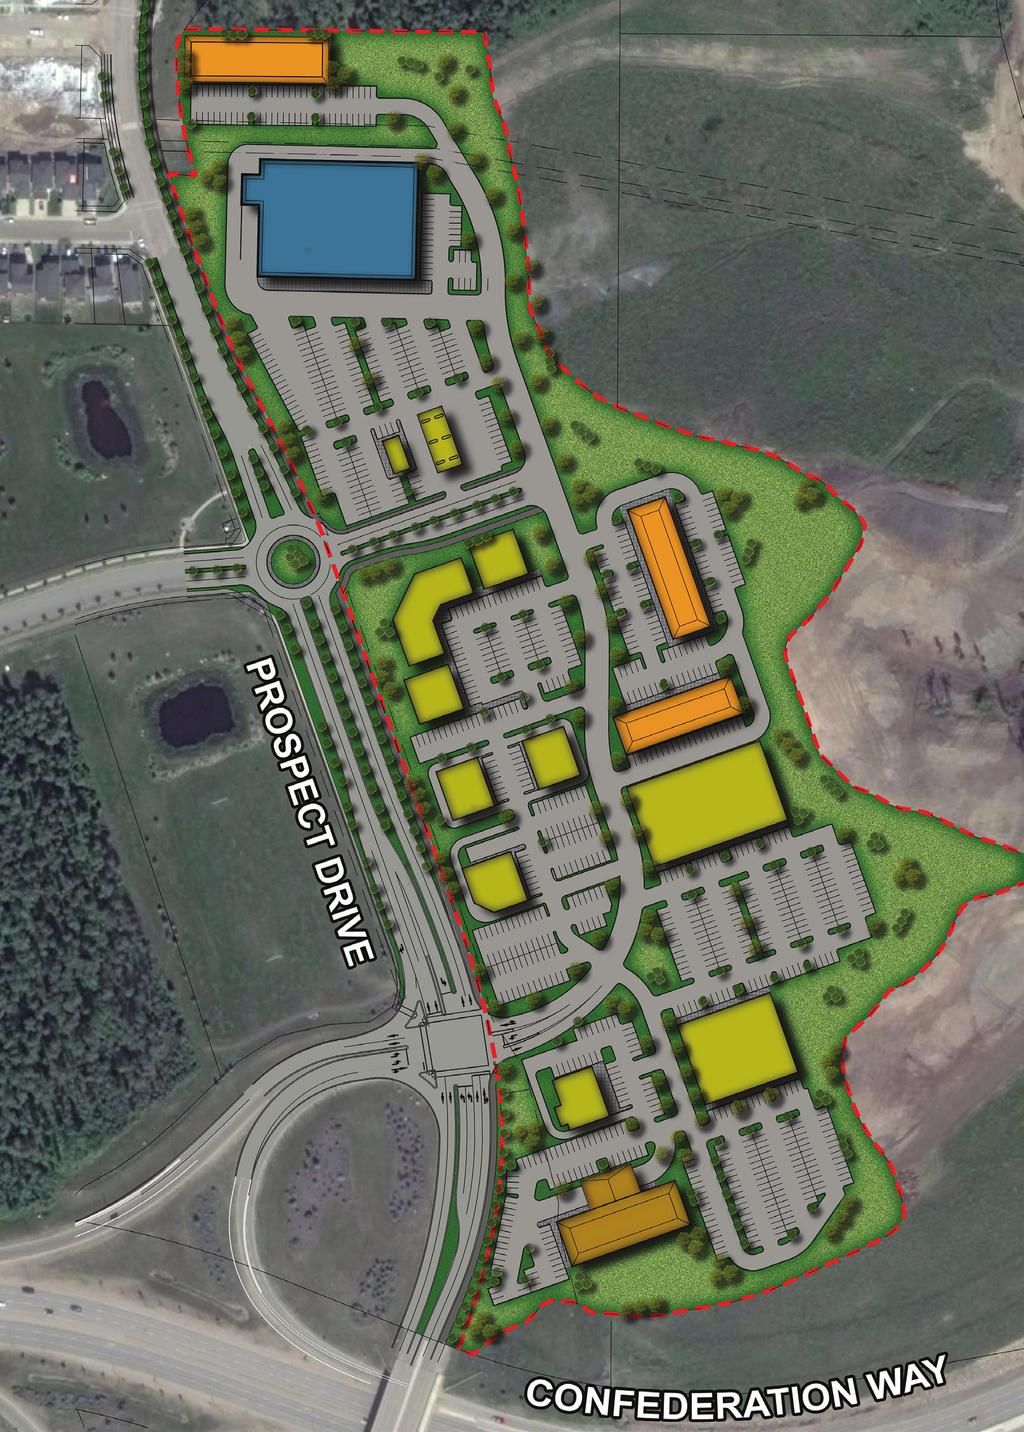 1-855-923-2338 Stone Creek Commercial: This proposed shopping centre is located in the vibrant existing community of Stone Creek just north of the Confederation Way